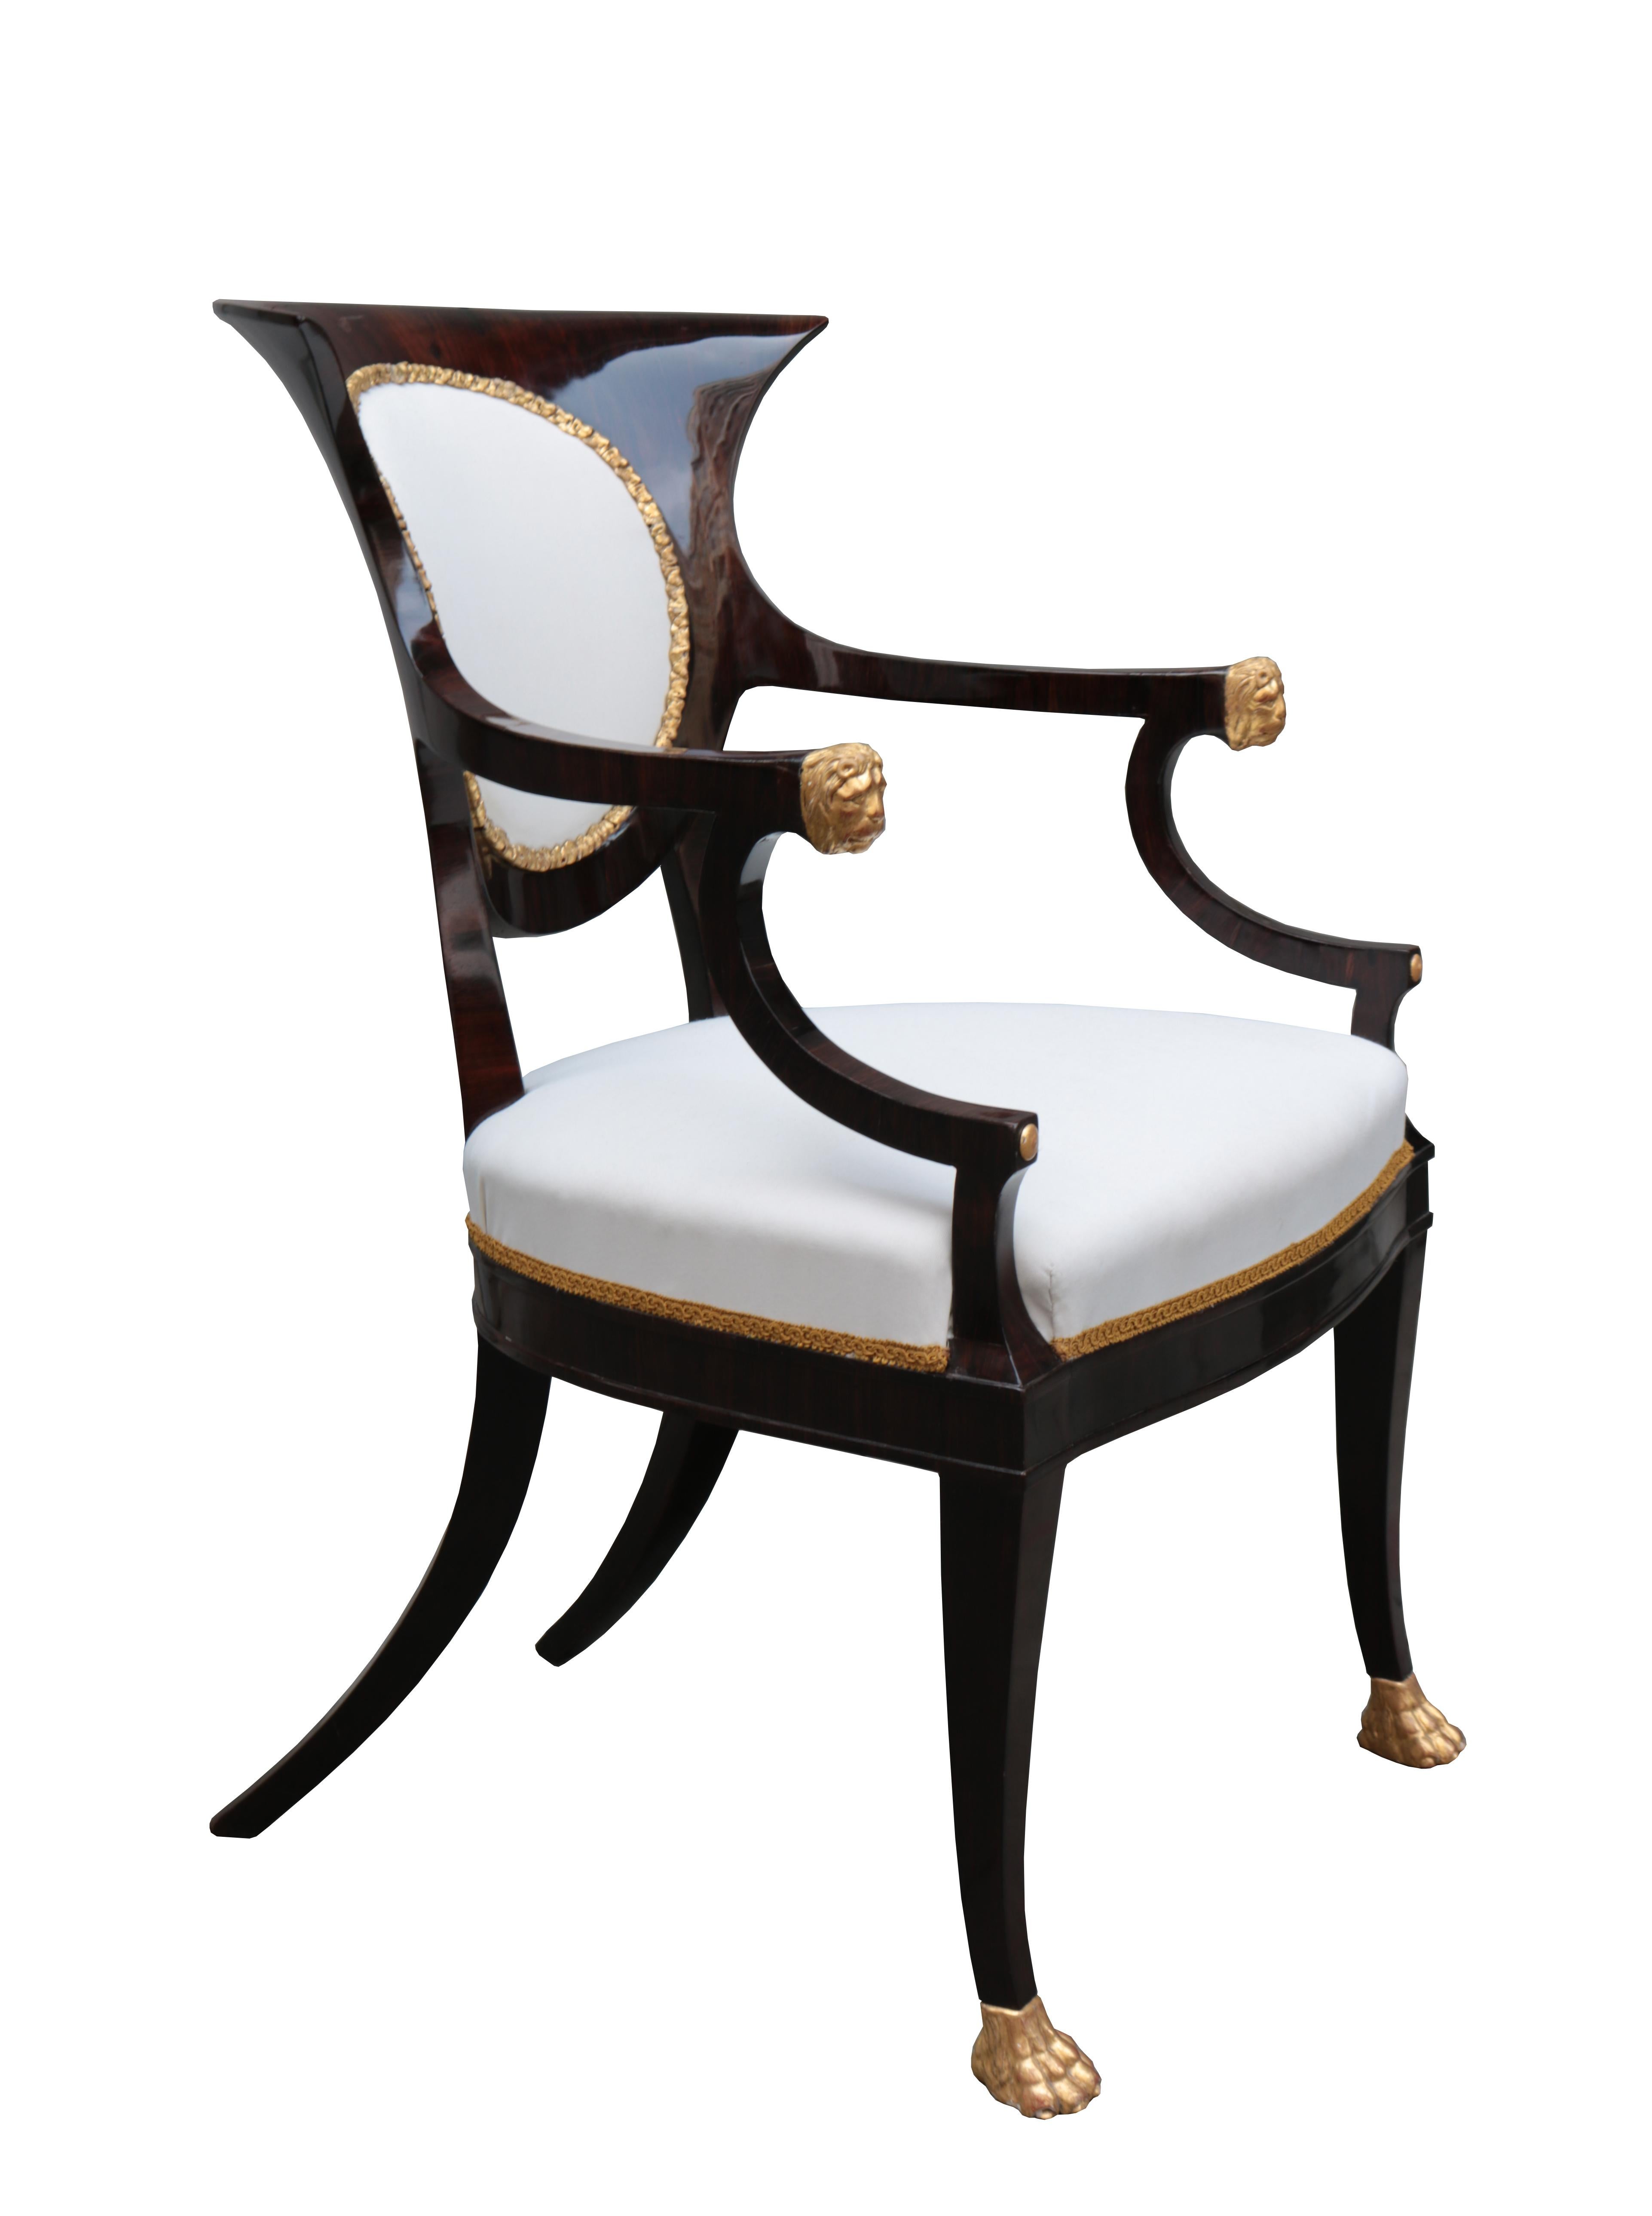 A fine pair of neoclassical armchairs.
Rosewood with fine giltwood carved details.